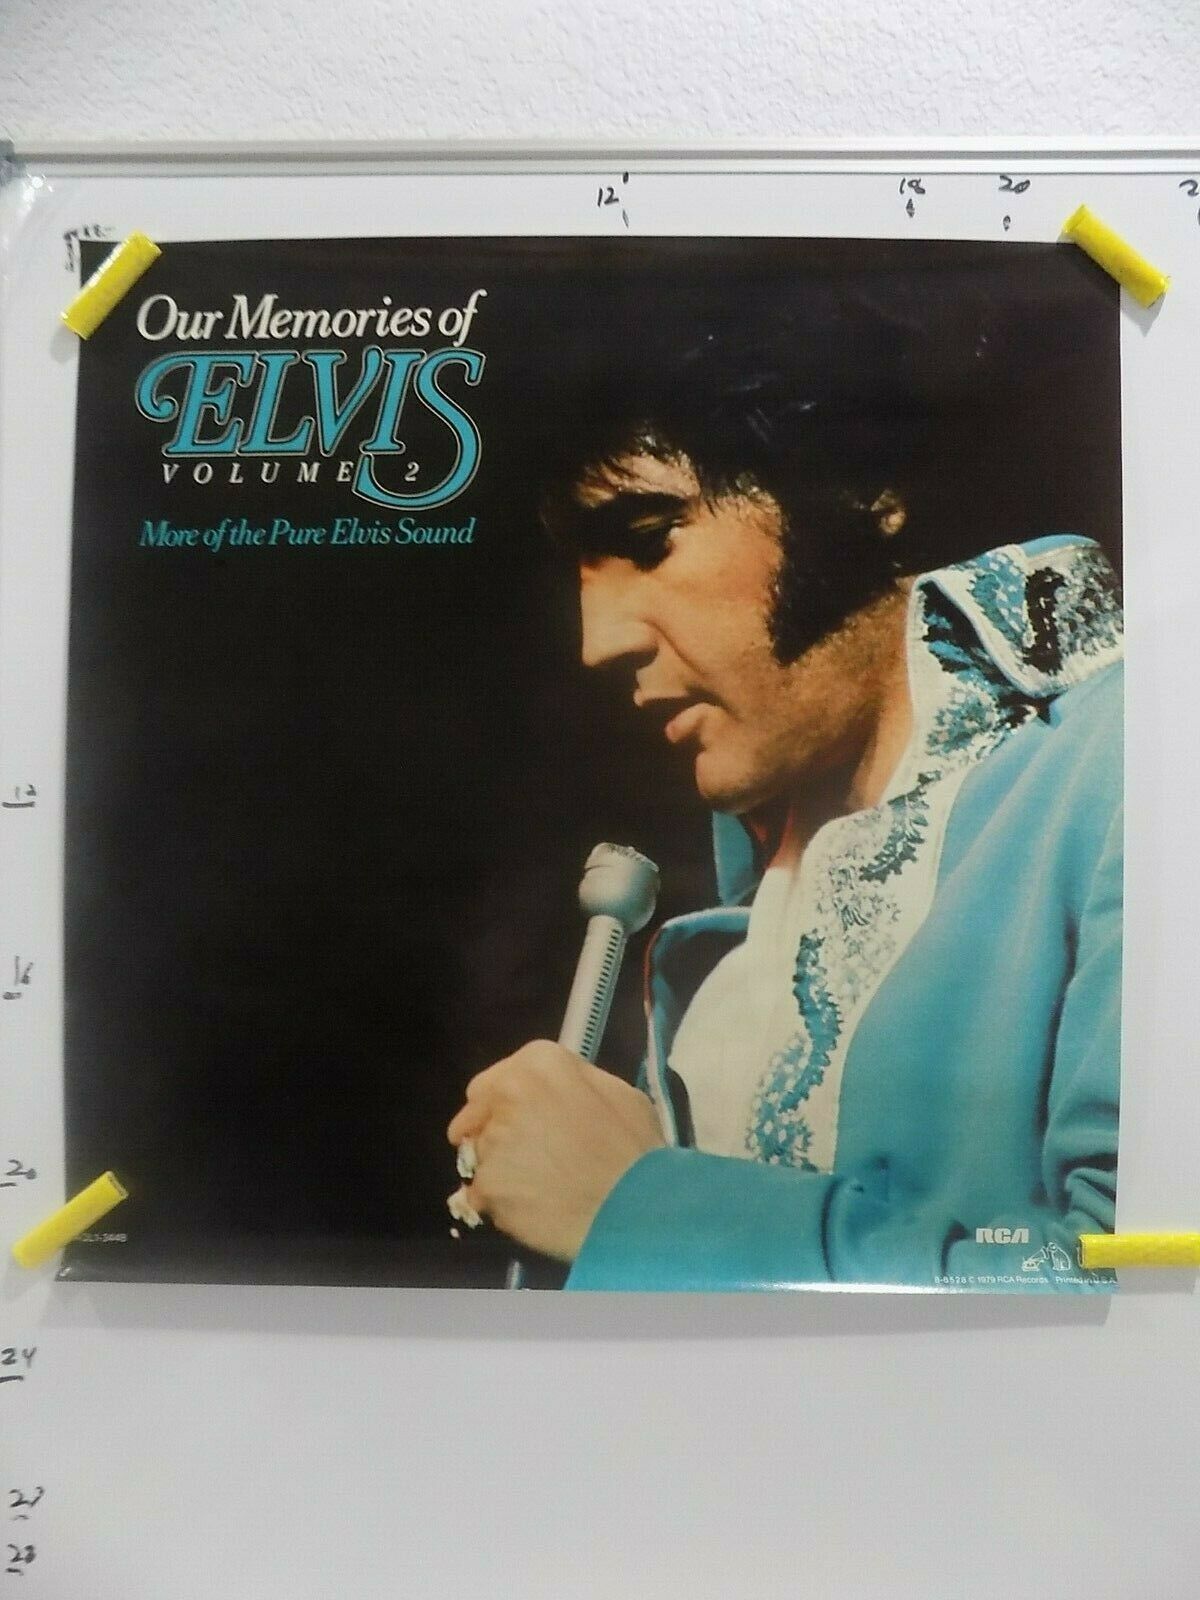 1979 22 X 26 Our Memories Of Elvis Volume 2 Poster Rca Advertising Poster